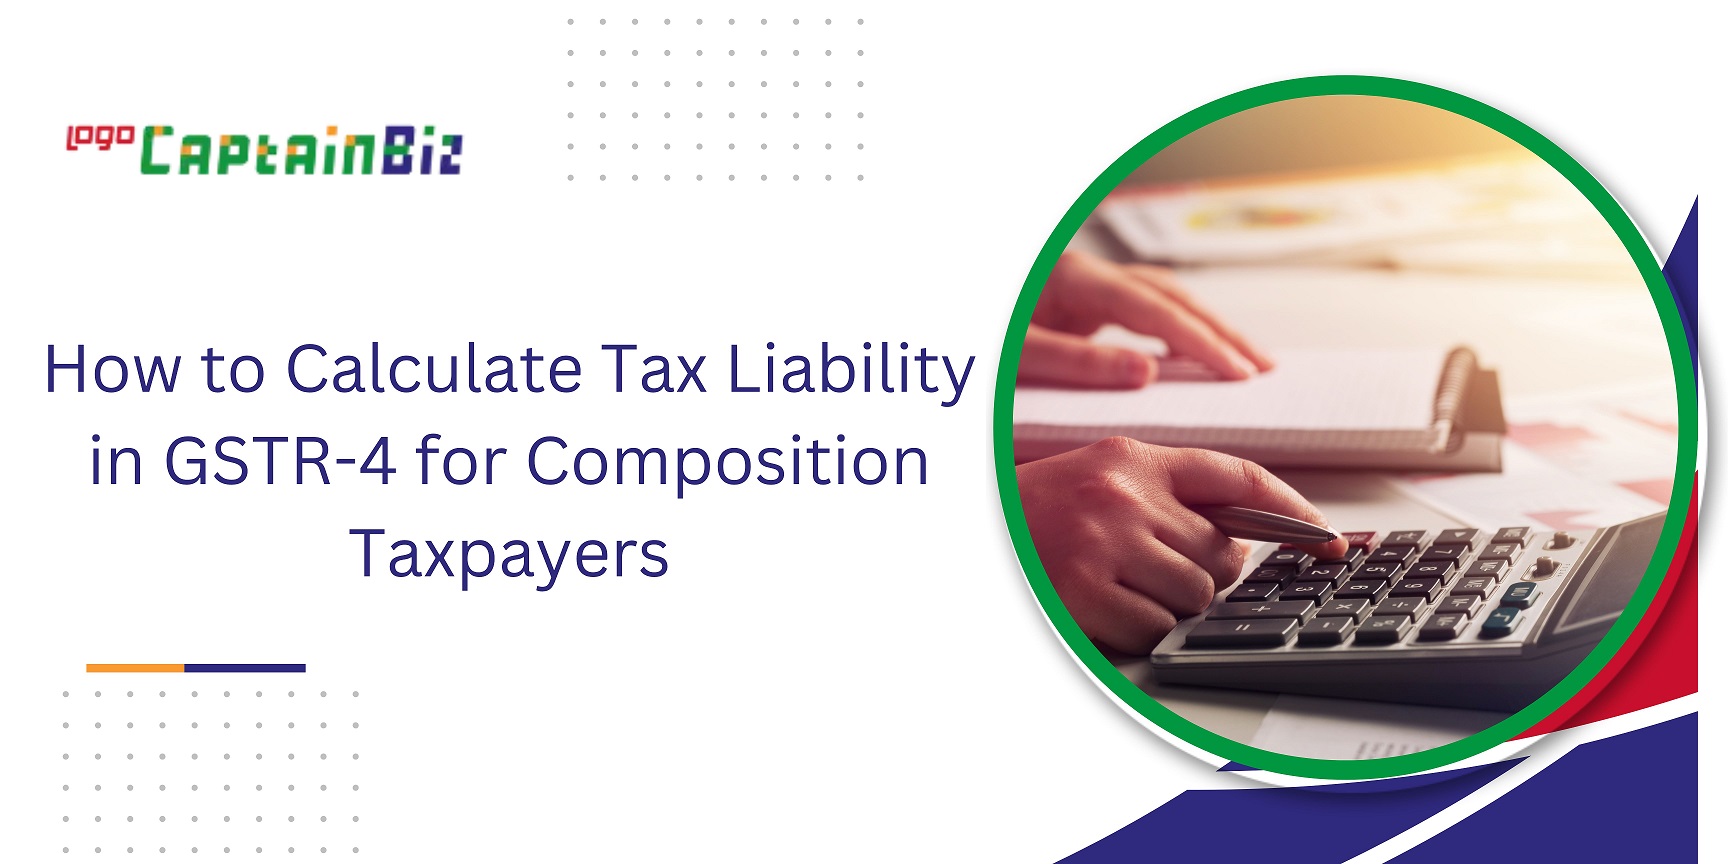 CaptainBiz: How to Calculate Tax Liability in GSTR-4 for Composition Taxpayers